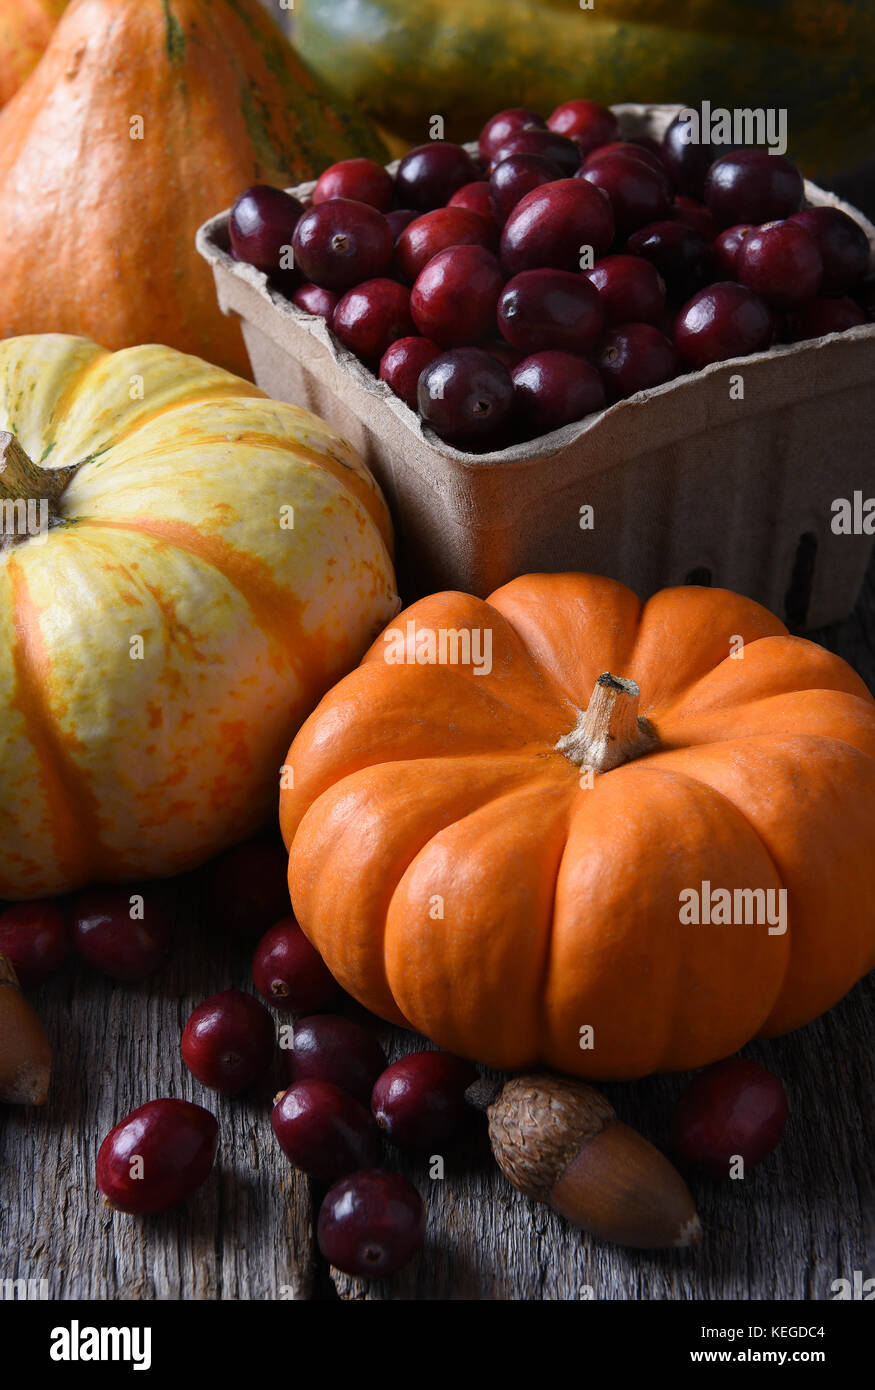 Autumn Still Life: Vertical shot with decorative pumpkins gourds and basket of fresh cranberries. Stock Photo